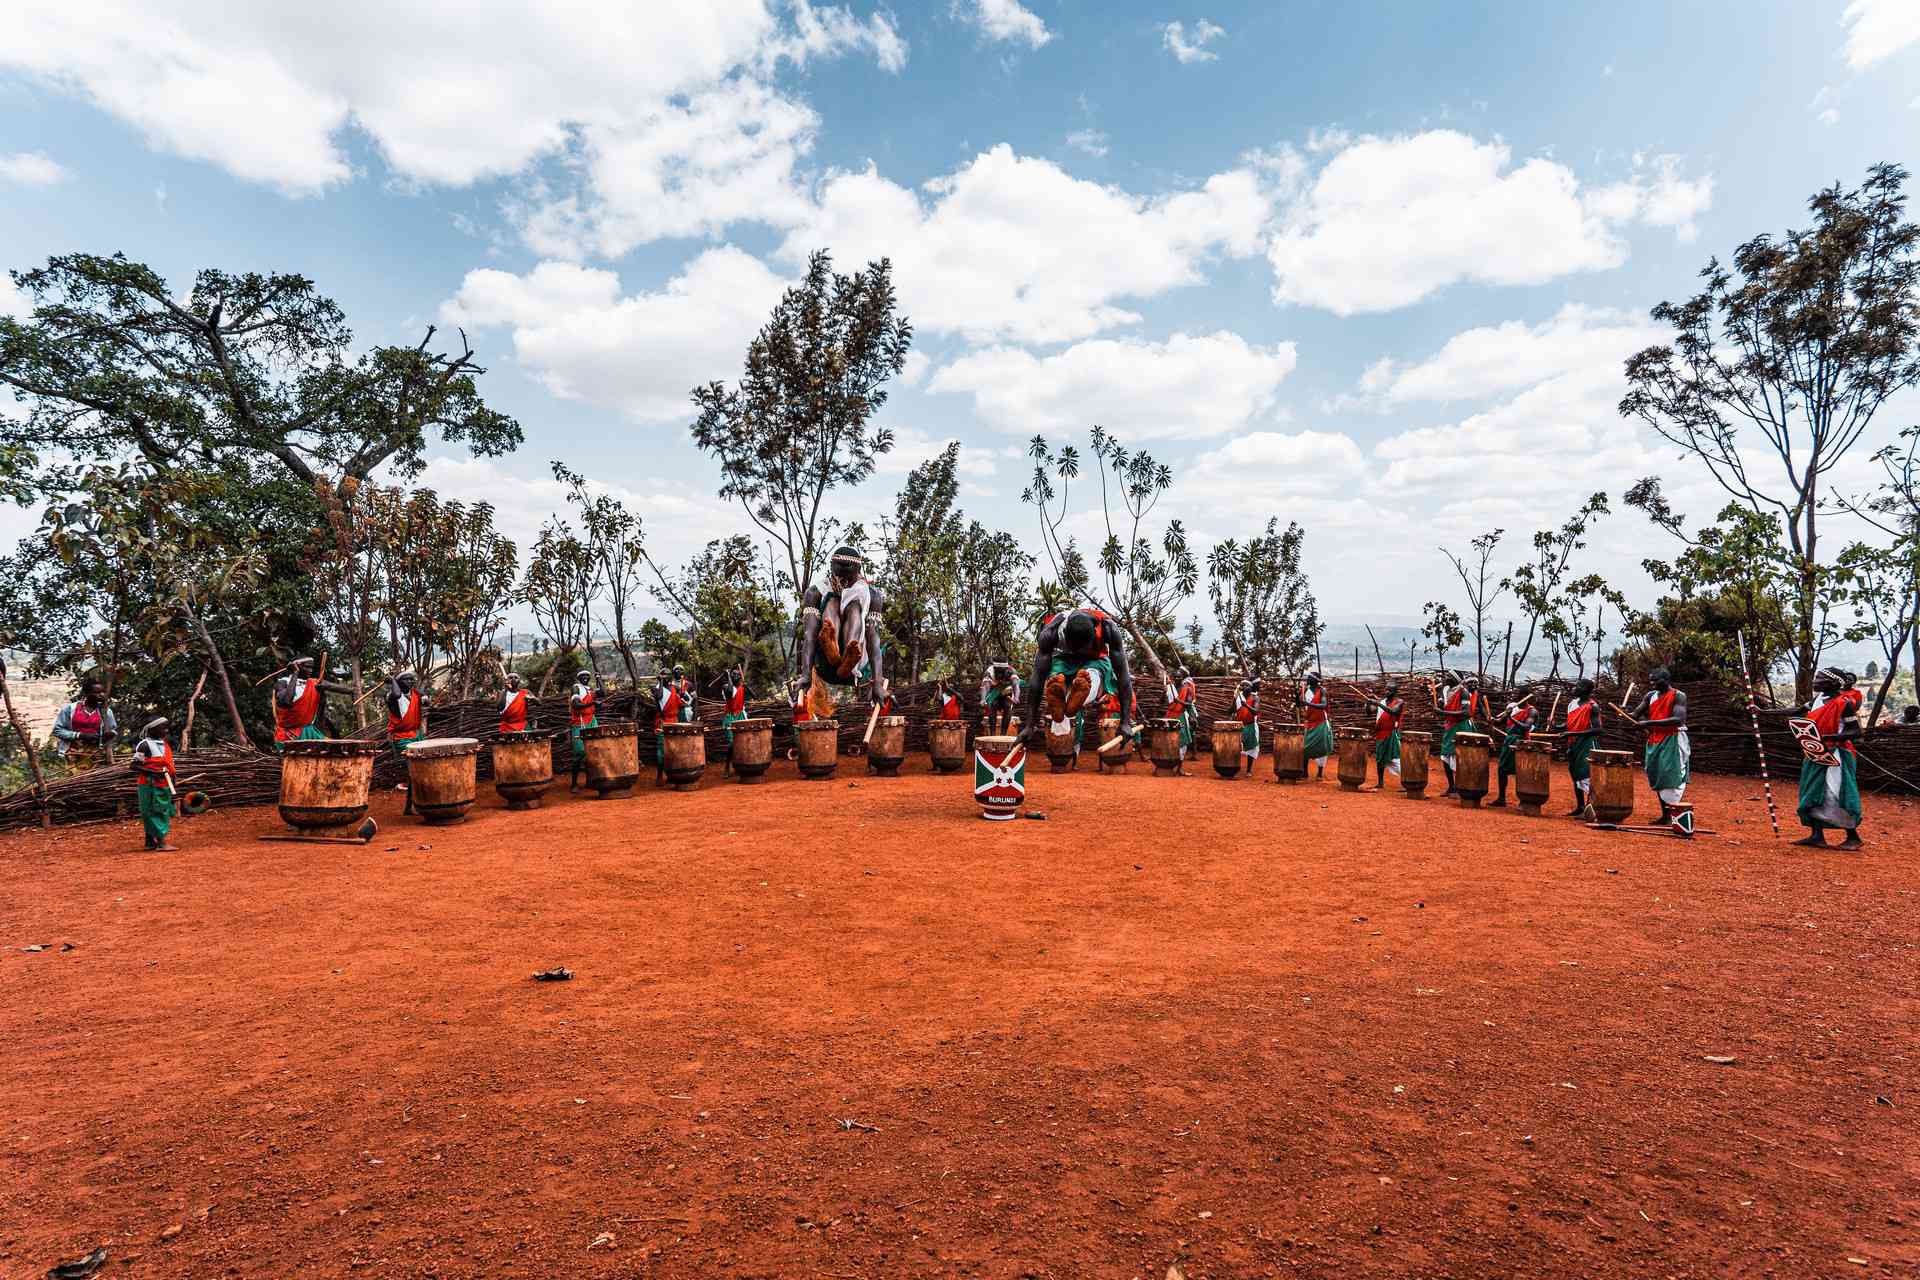 The Royal Drummers of Burundi. A riot with the Royal Drummers and Batwas of Burundi